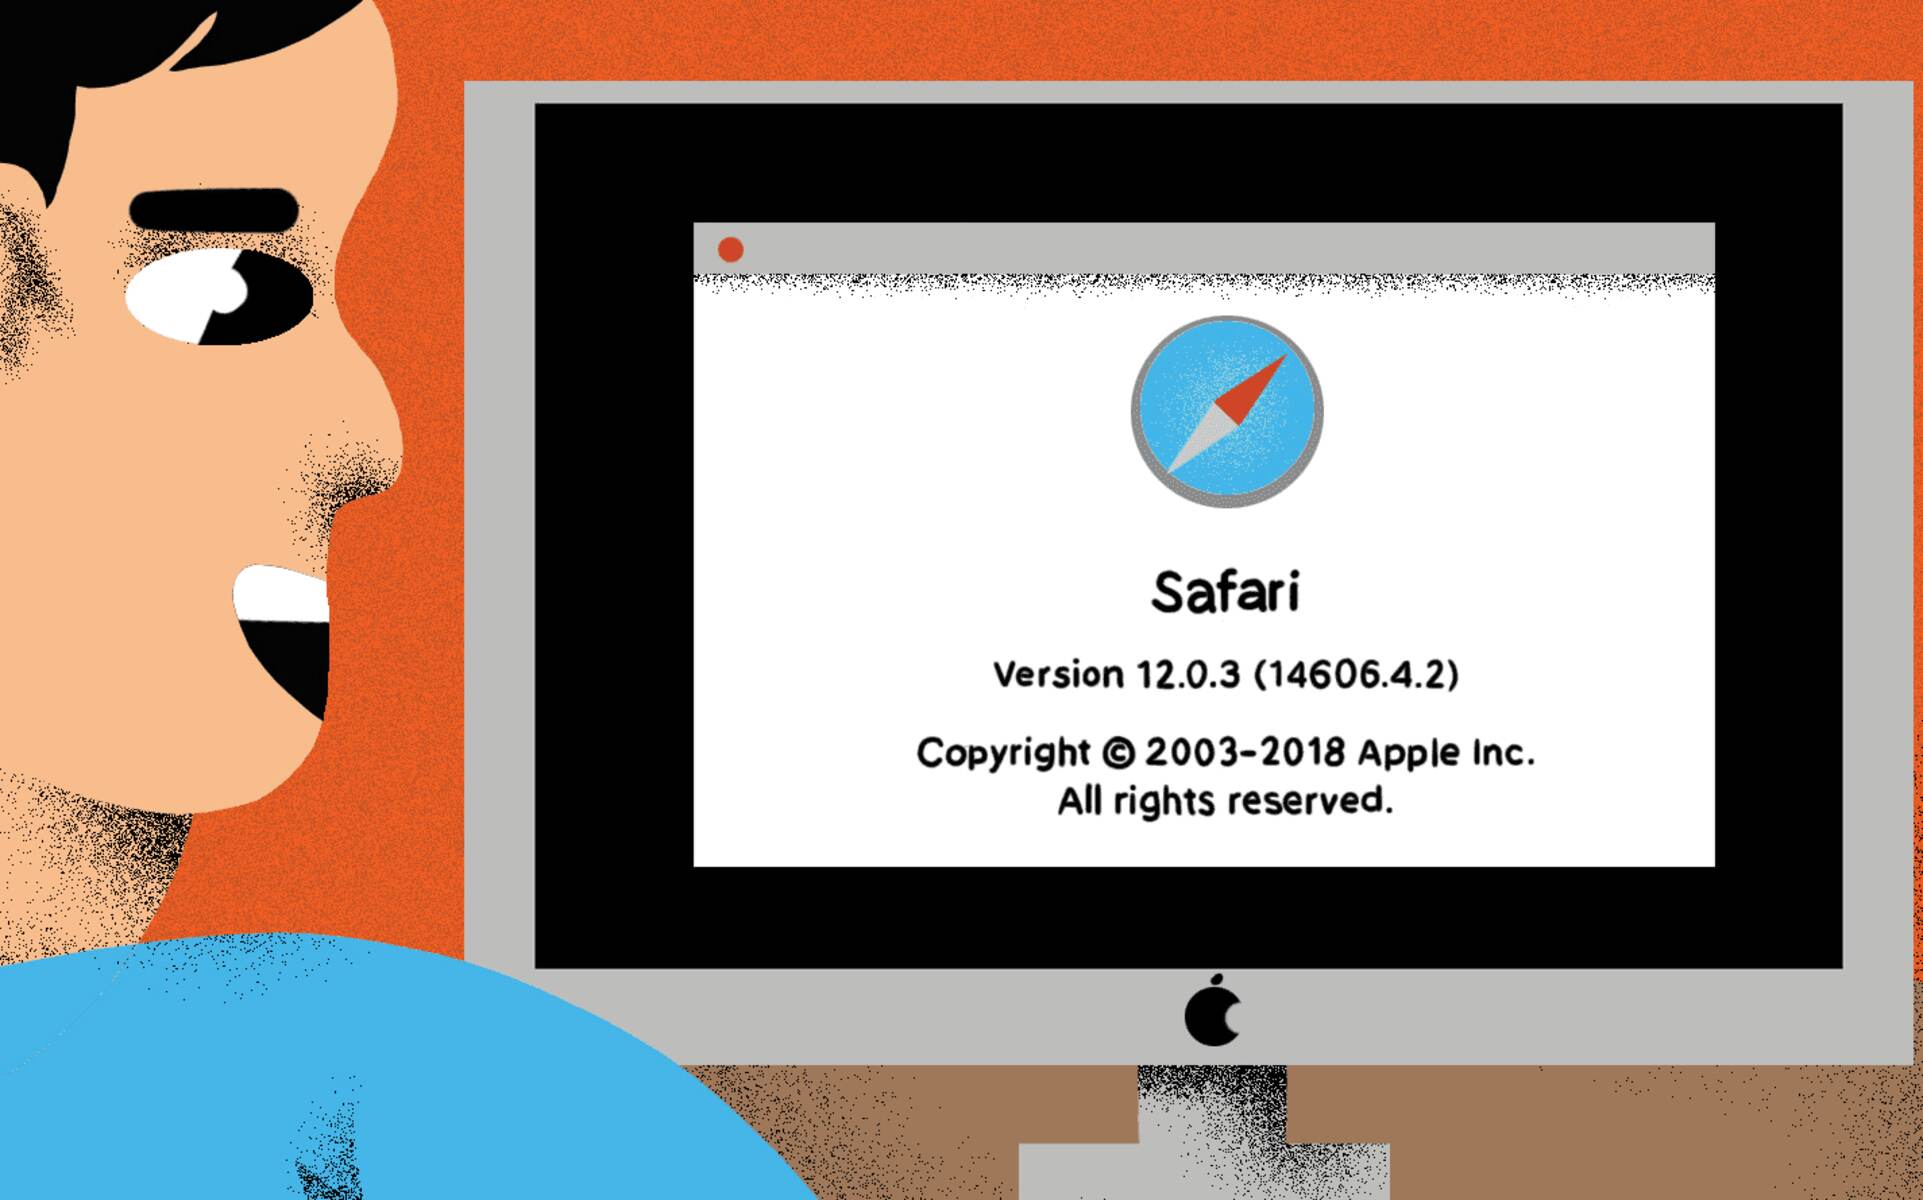 What Is The Current Version Of Safari